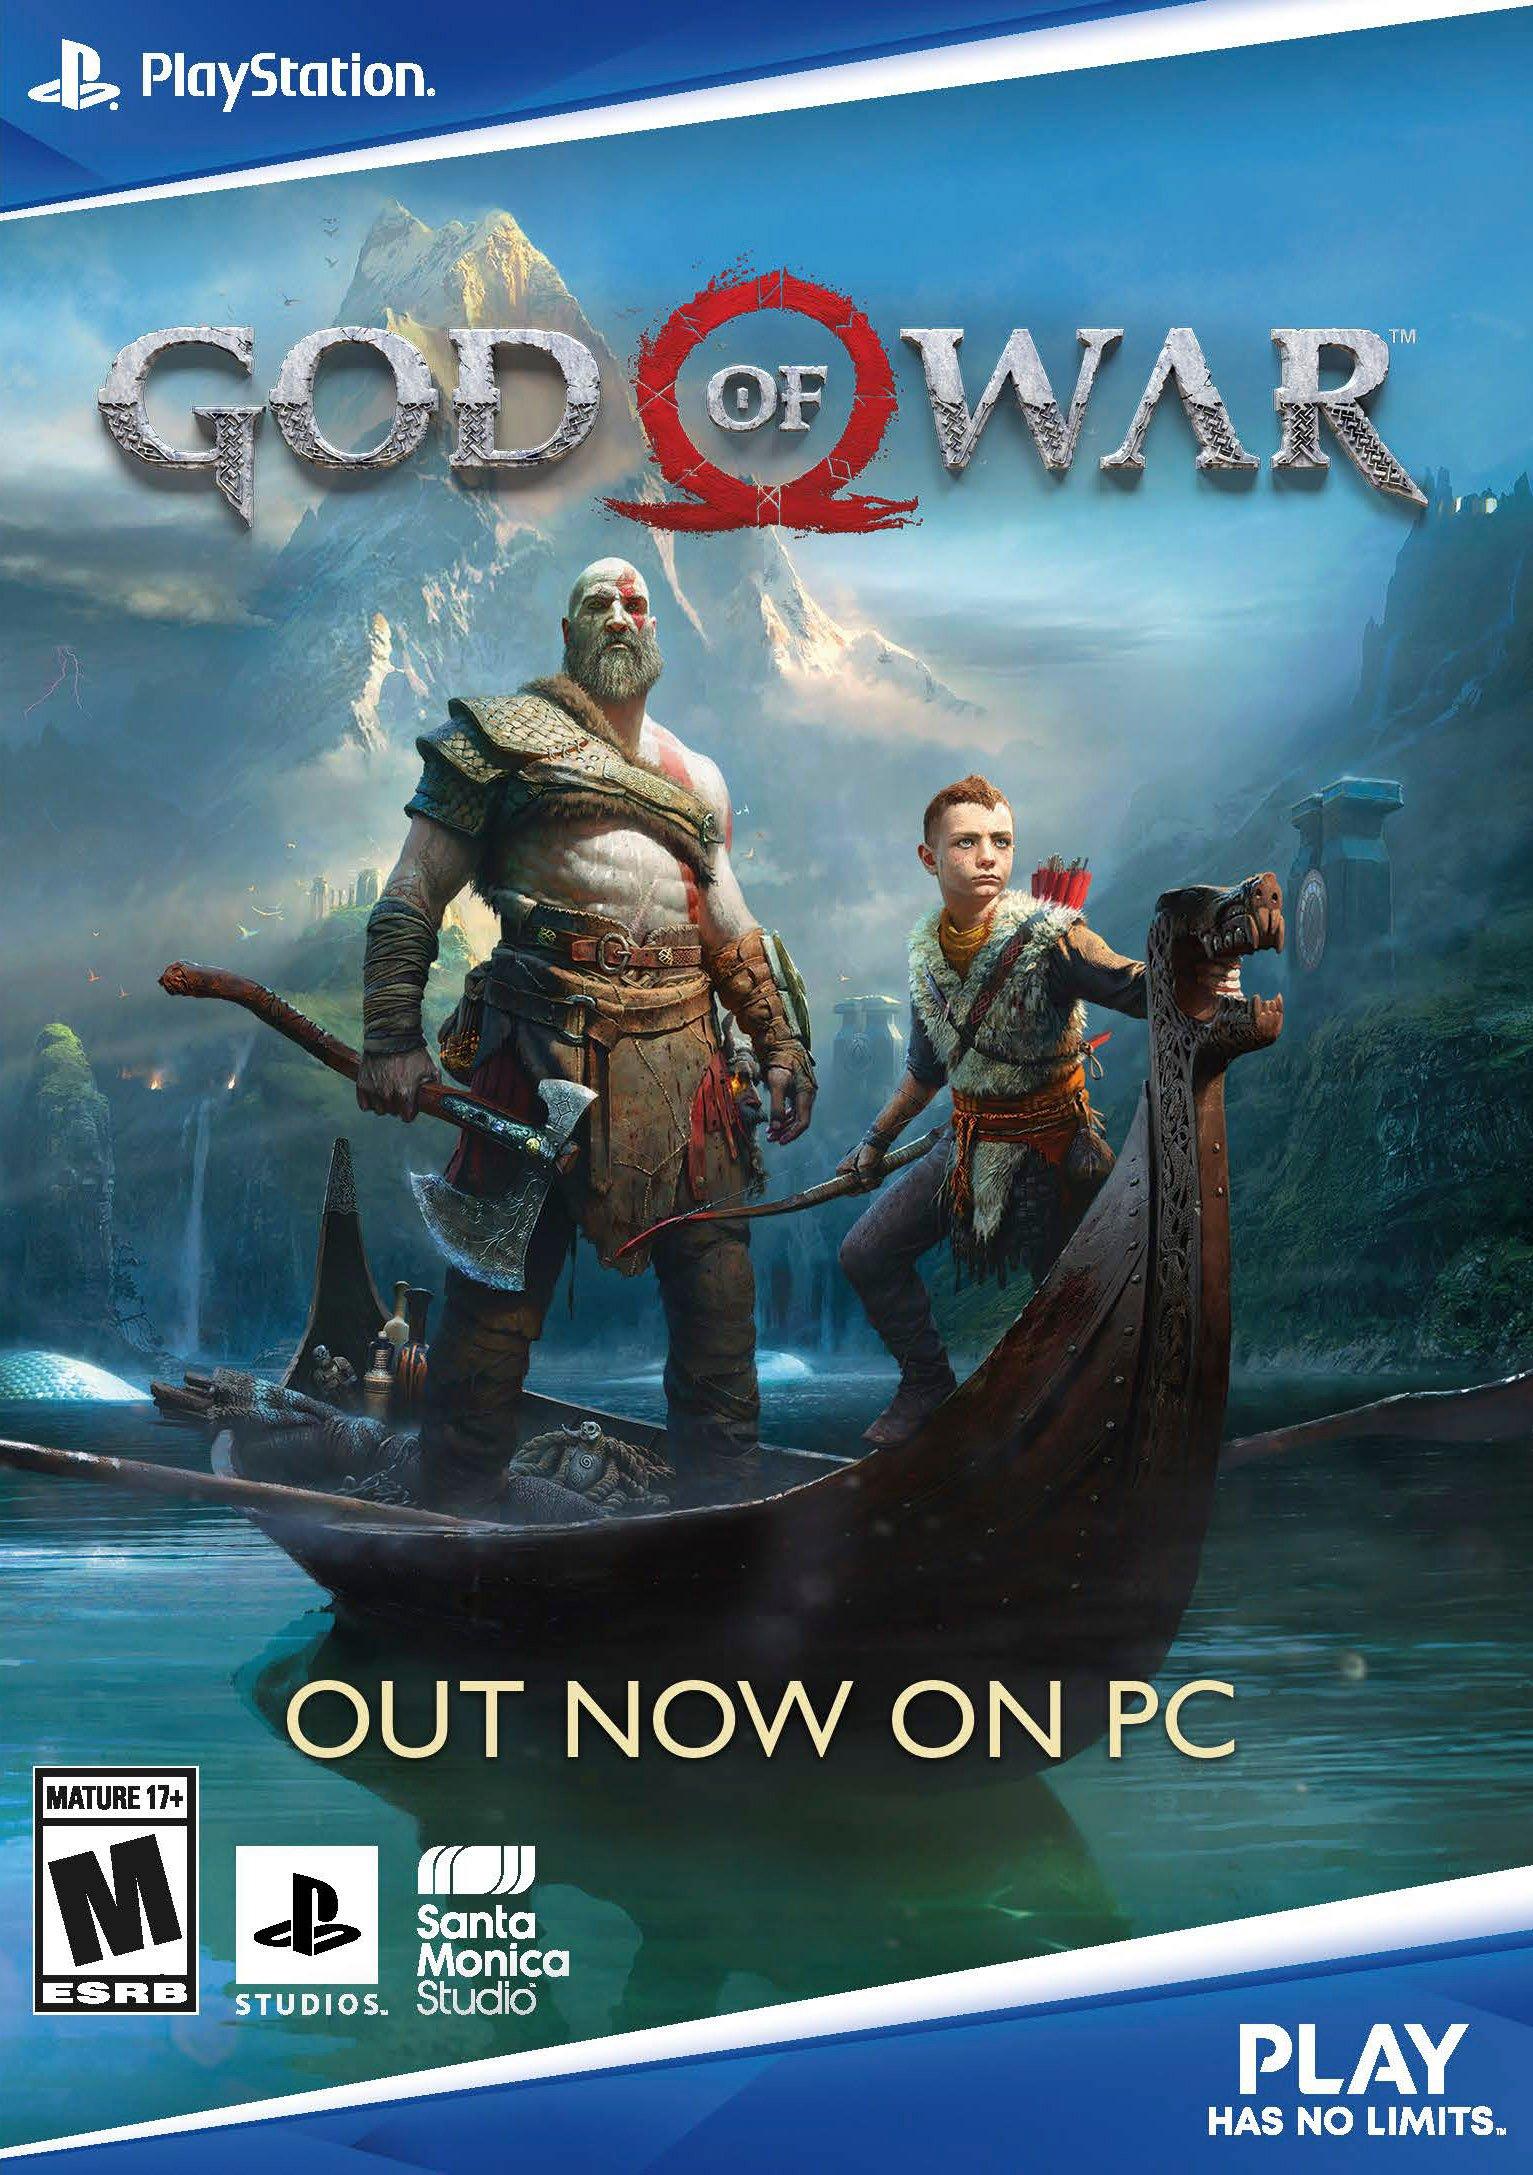 God Of War' Officially Announced For PC, Coming To Steam In 2022